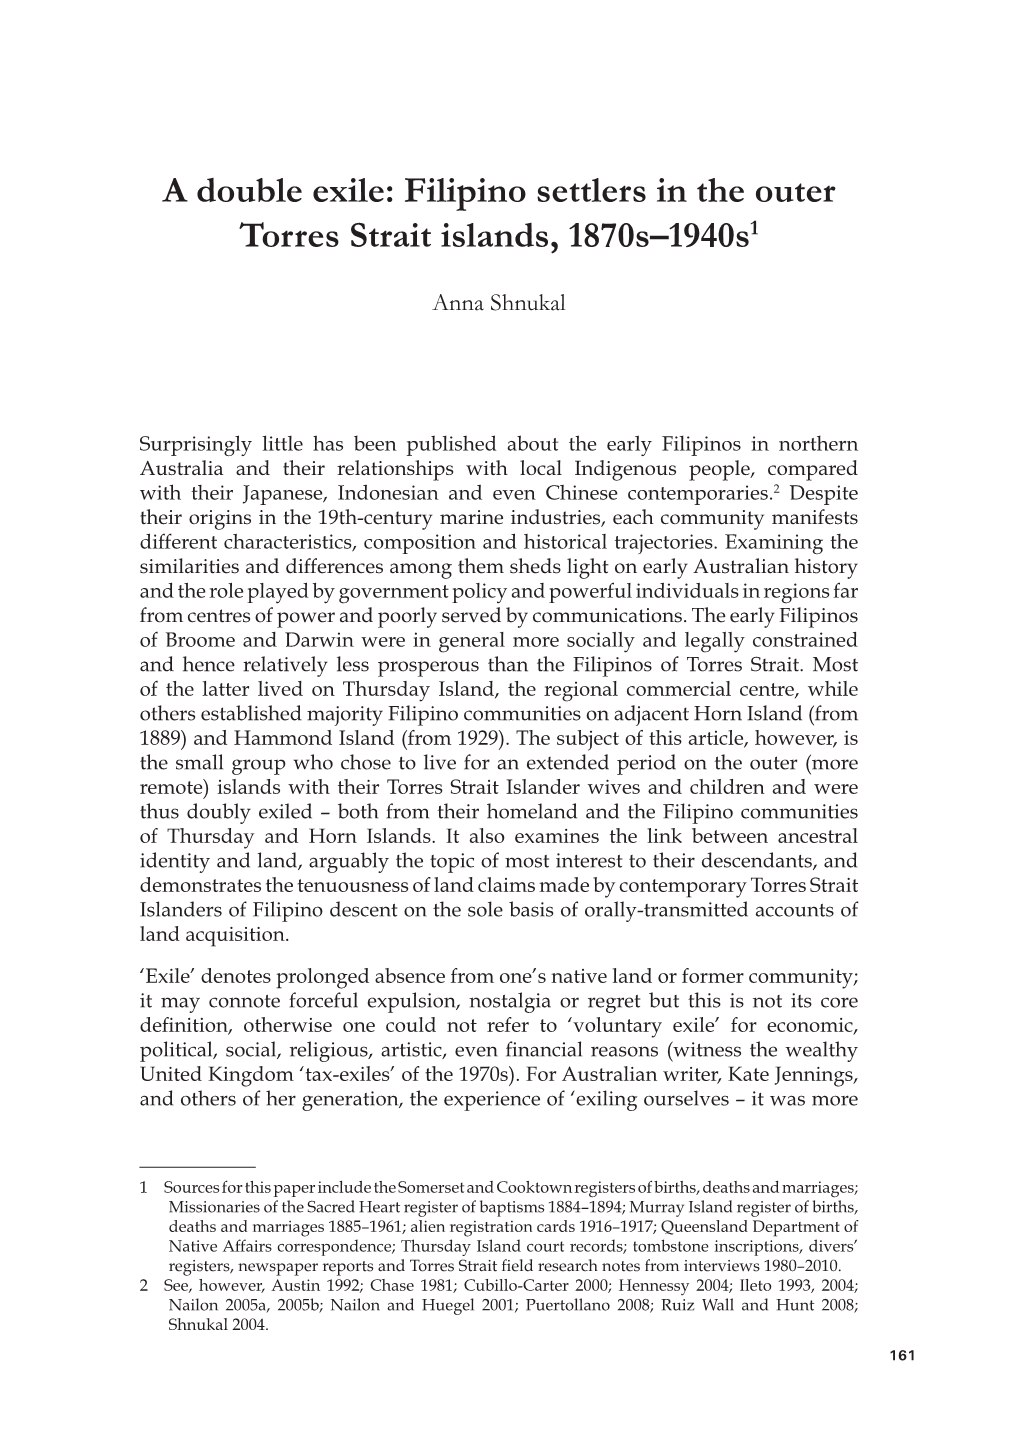 A Double Exile: Filipino Settlers in the Outer Torres Strait Islands, 1870S–1940S1